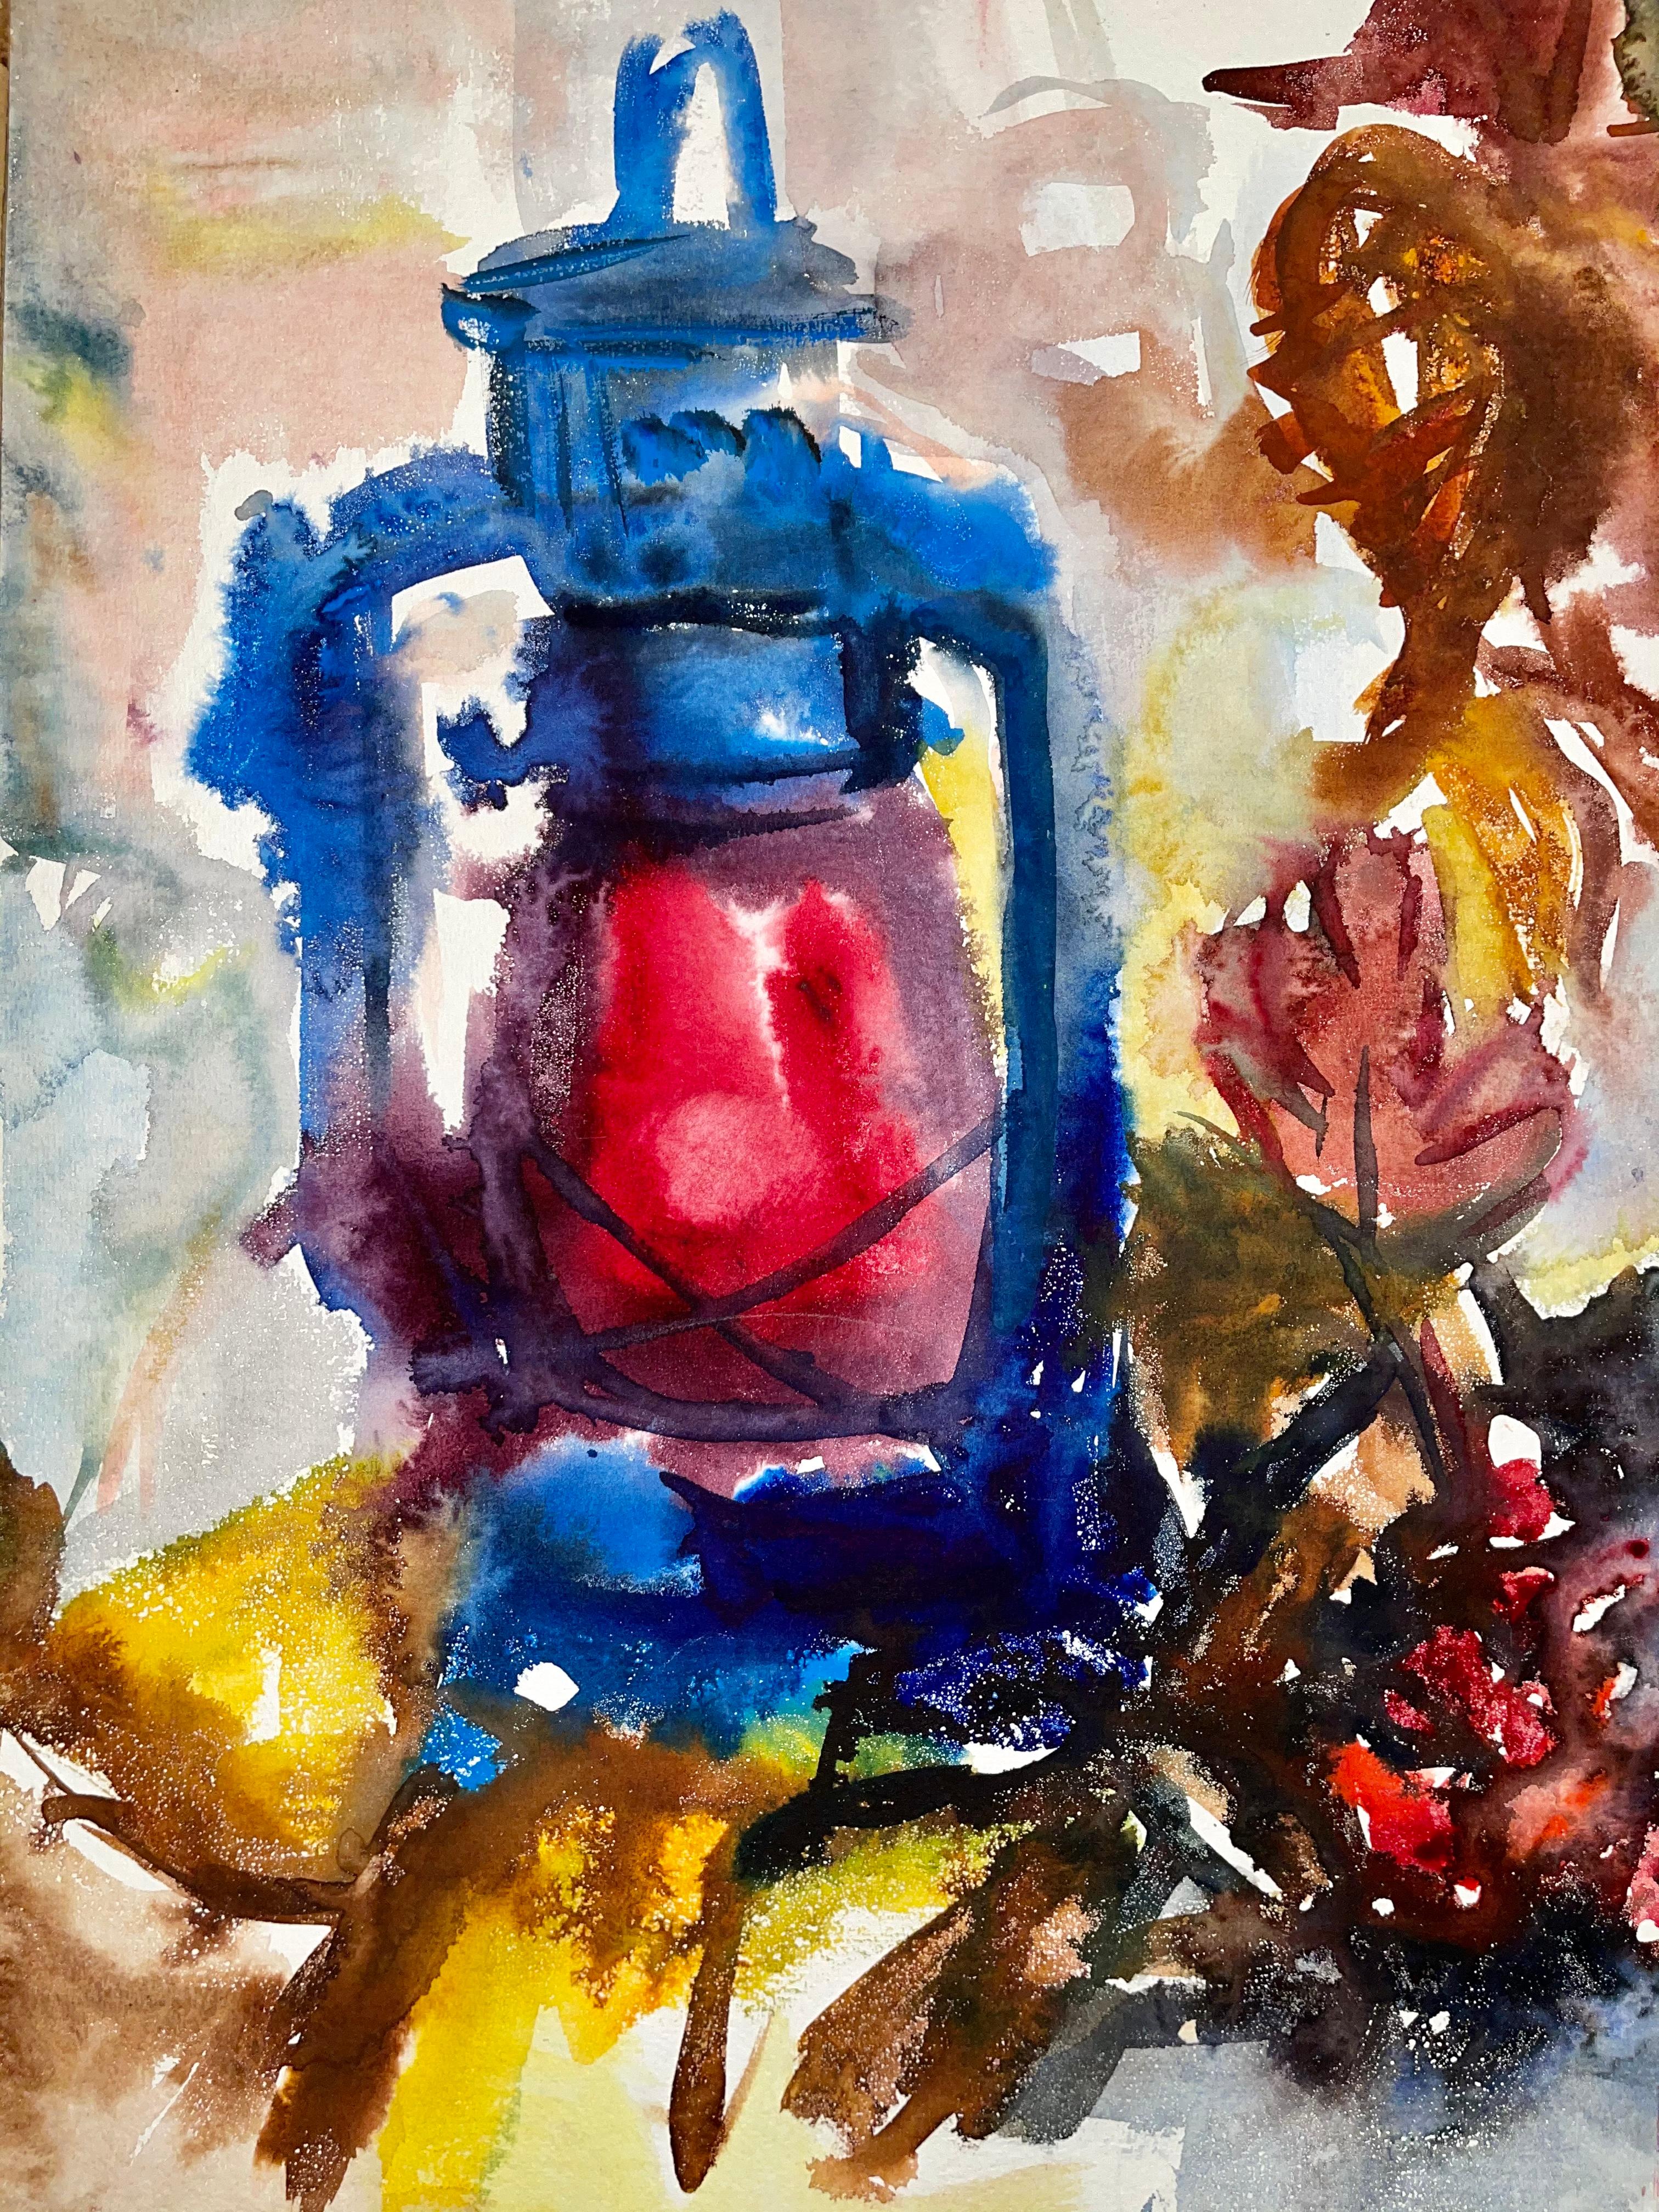 Untitled (Abstract Still Life with Lantern, Flowers and Fruit) - Painting by Ian Hornak